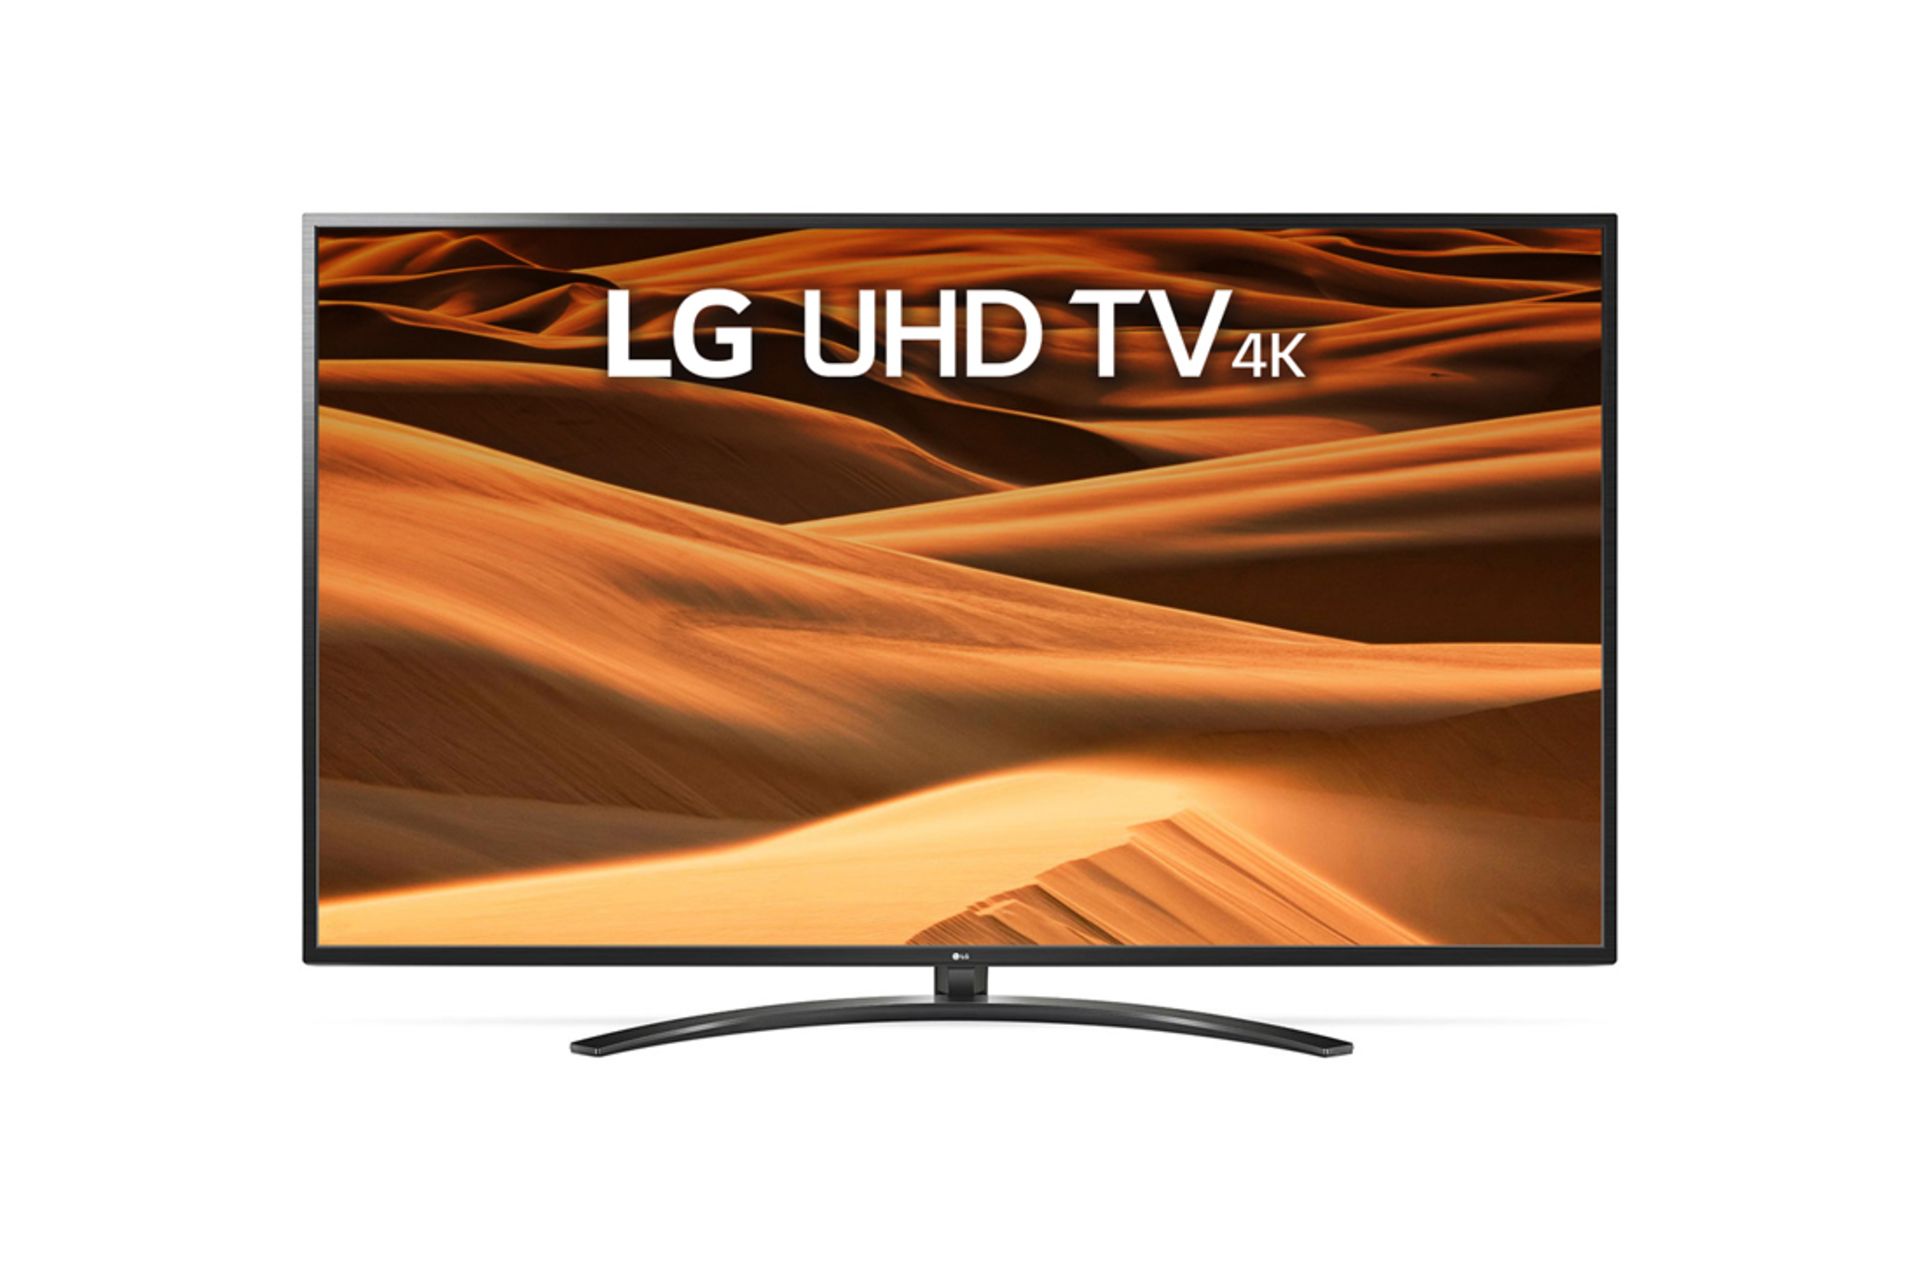 V Grade A LG 70 Inch ACTIVE HDR 4K ULTRA HD LED SMART TV WITH FREEVIEW HD & WEBOS & WIFI - AI TV